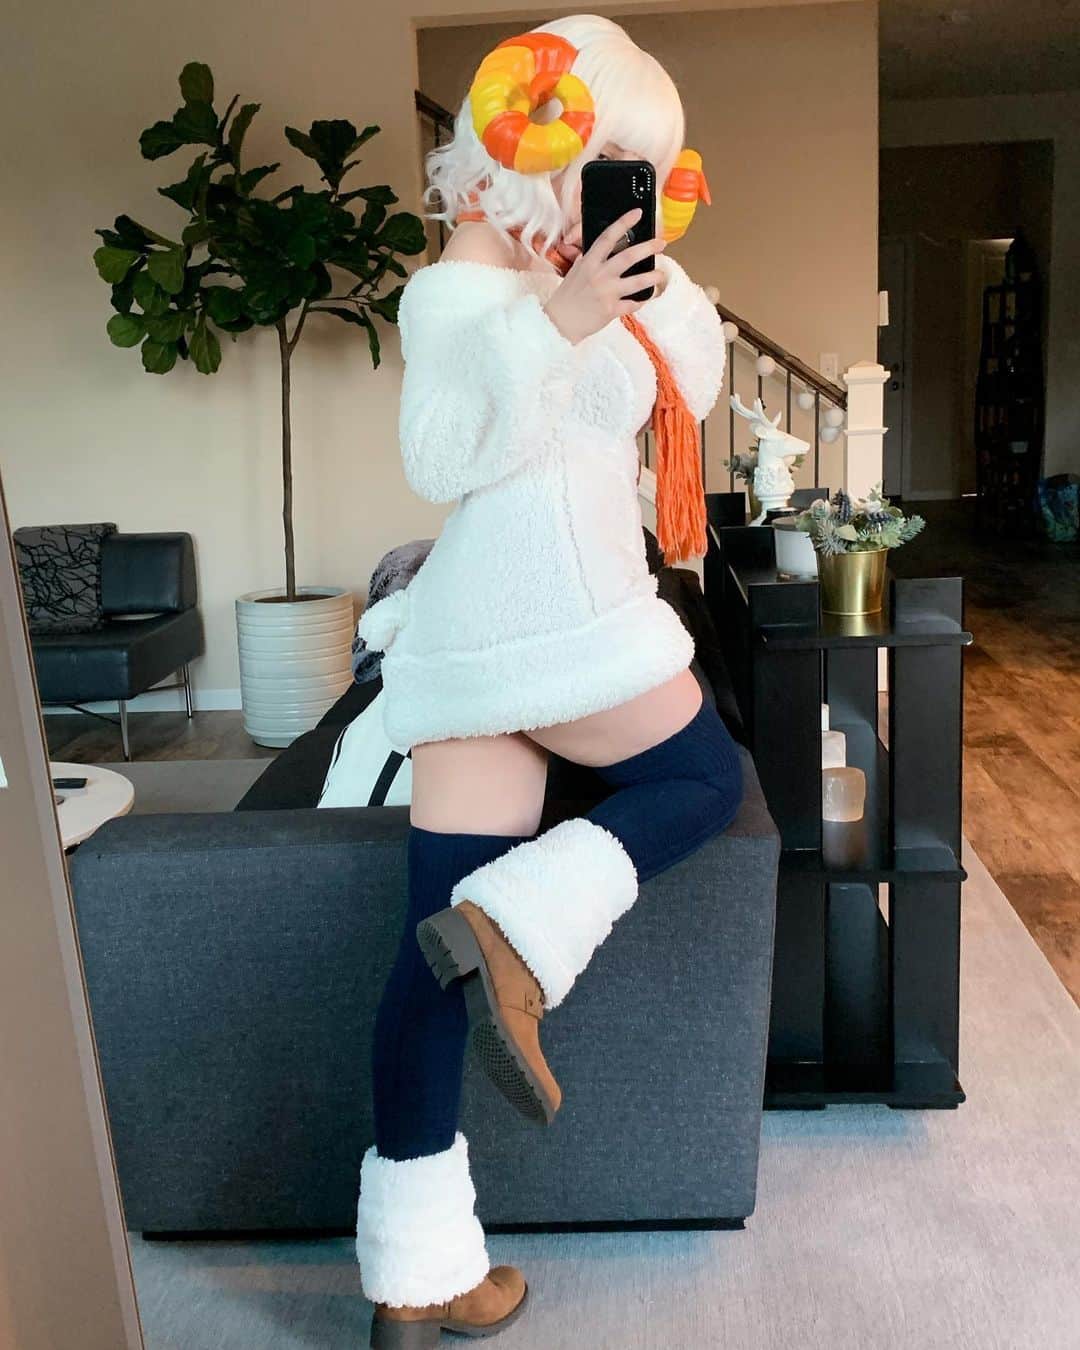 Tessaのインスタグラム：「Vesta (ACNH) Gijinka try-on!!!🧡🐏💛  I’ve had this cosplay planned for SO long and I’m so excited to shoot this tomorrow with my bb @rizumari !🥺I was super unsure of how this would look once it was all together, but I feel adorable. Now I’m hoping the makeup turns out more cute than creepy! -sweats-  Horns: CosplayManiaShop on Etsy (painted by me!) Wig: @kasouwigs  Sheep outfit: @aliexpress  Socks: @amazon   #animalcrossingnewhorizons #animalcrossing #acnh #acnhcosplay #vestaacnh #vestacosplay」